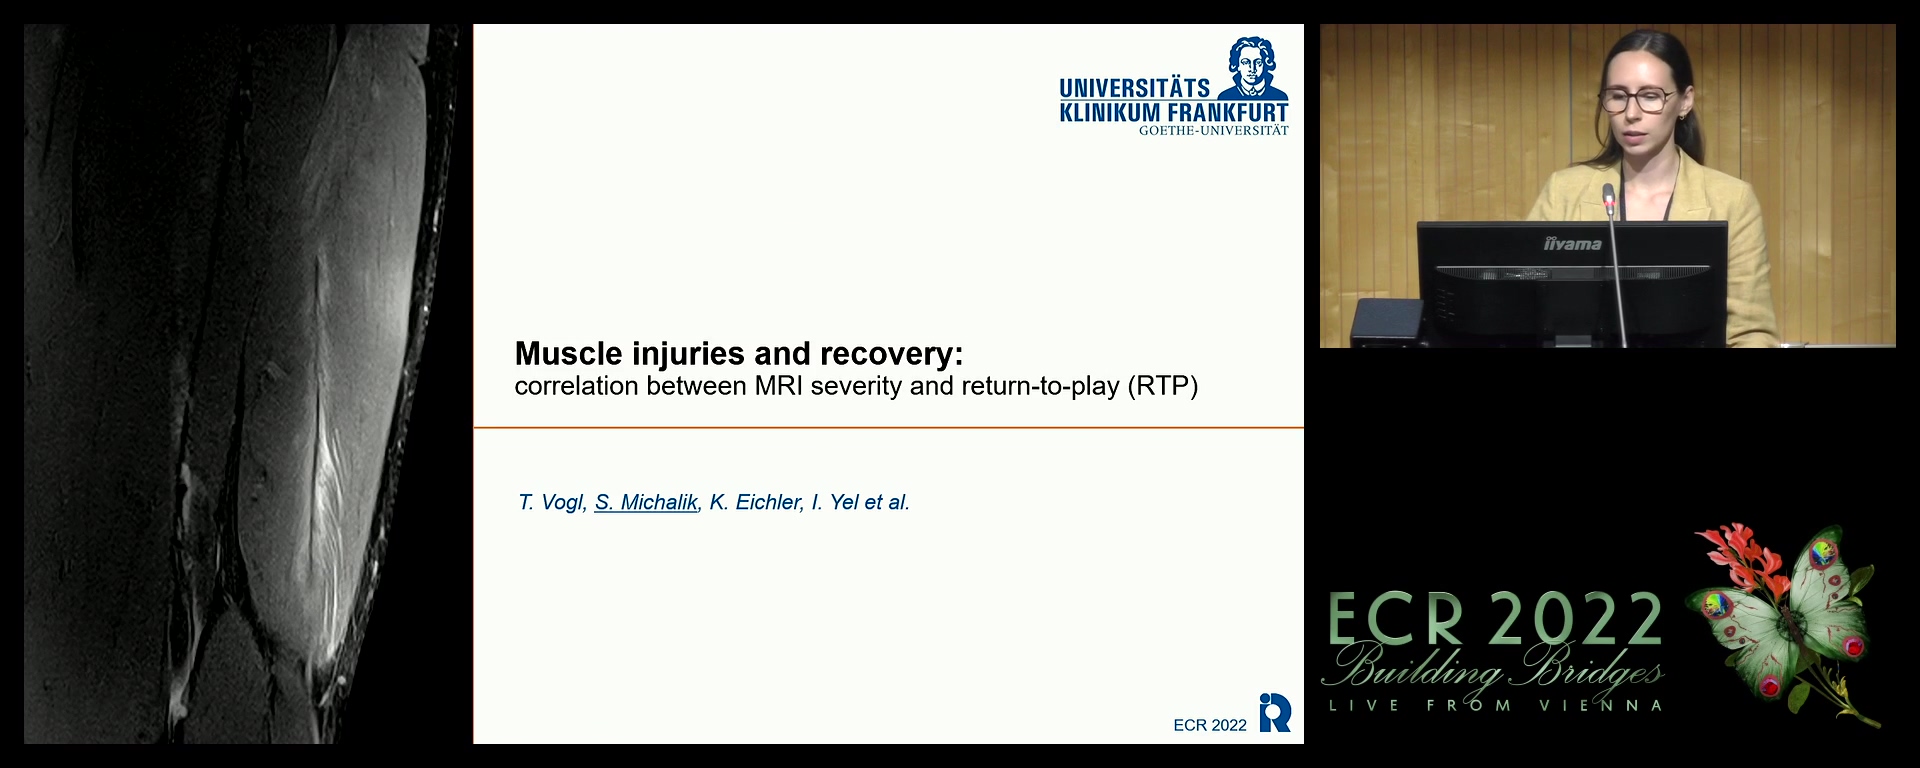 Muscle injuries and recovery: correlation MRI injury severity and return to play (RTP): a prospective study